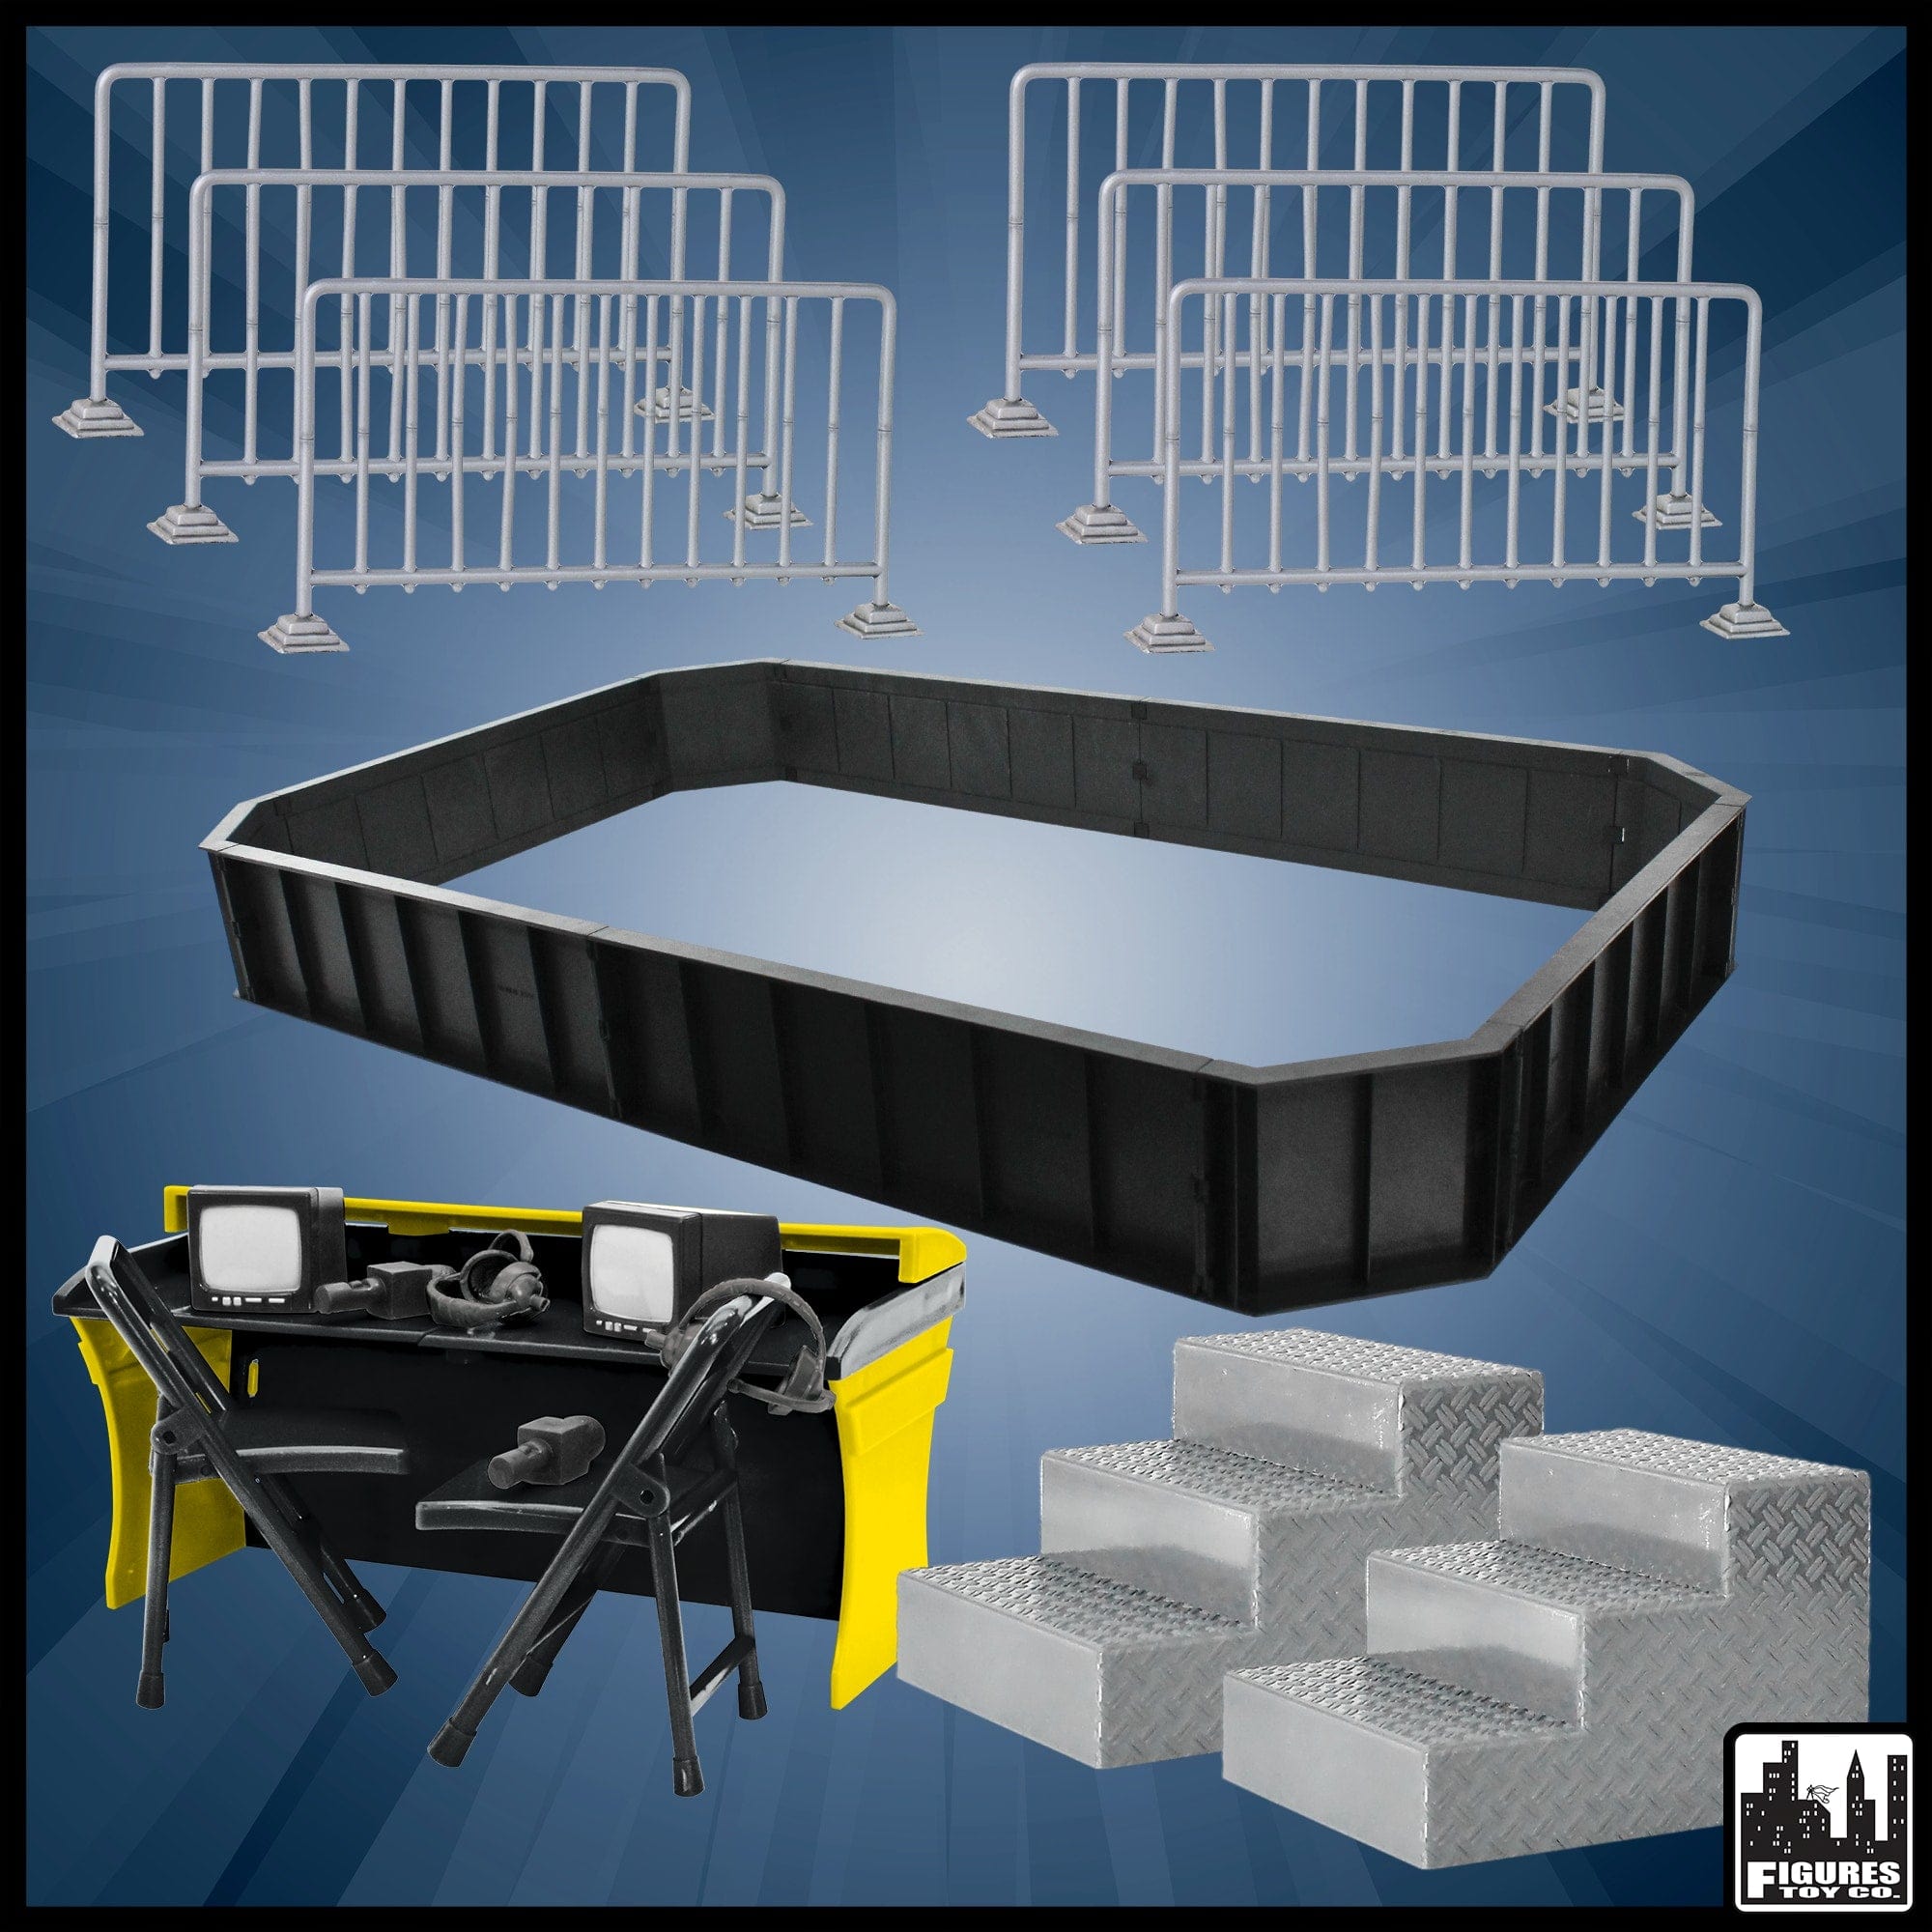 wwe toy arena